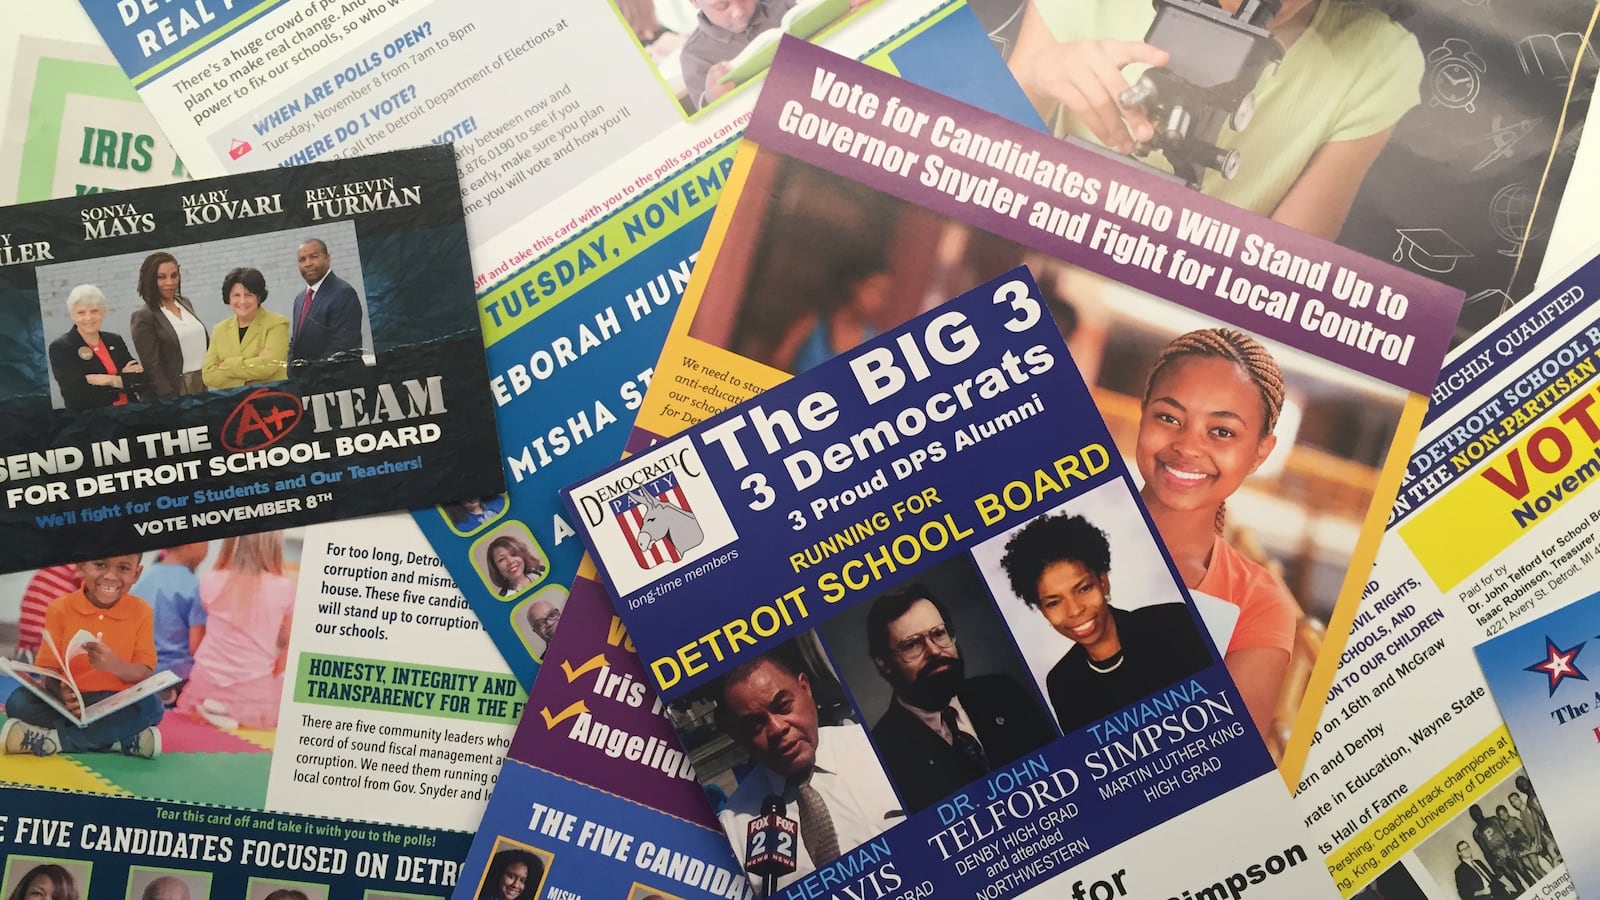 A total of 63 candidates ran for the first board of the new Detroit Public Schools Community District.